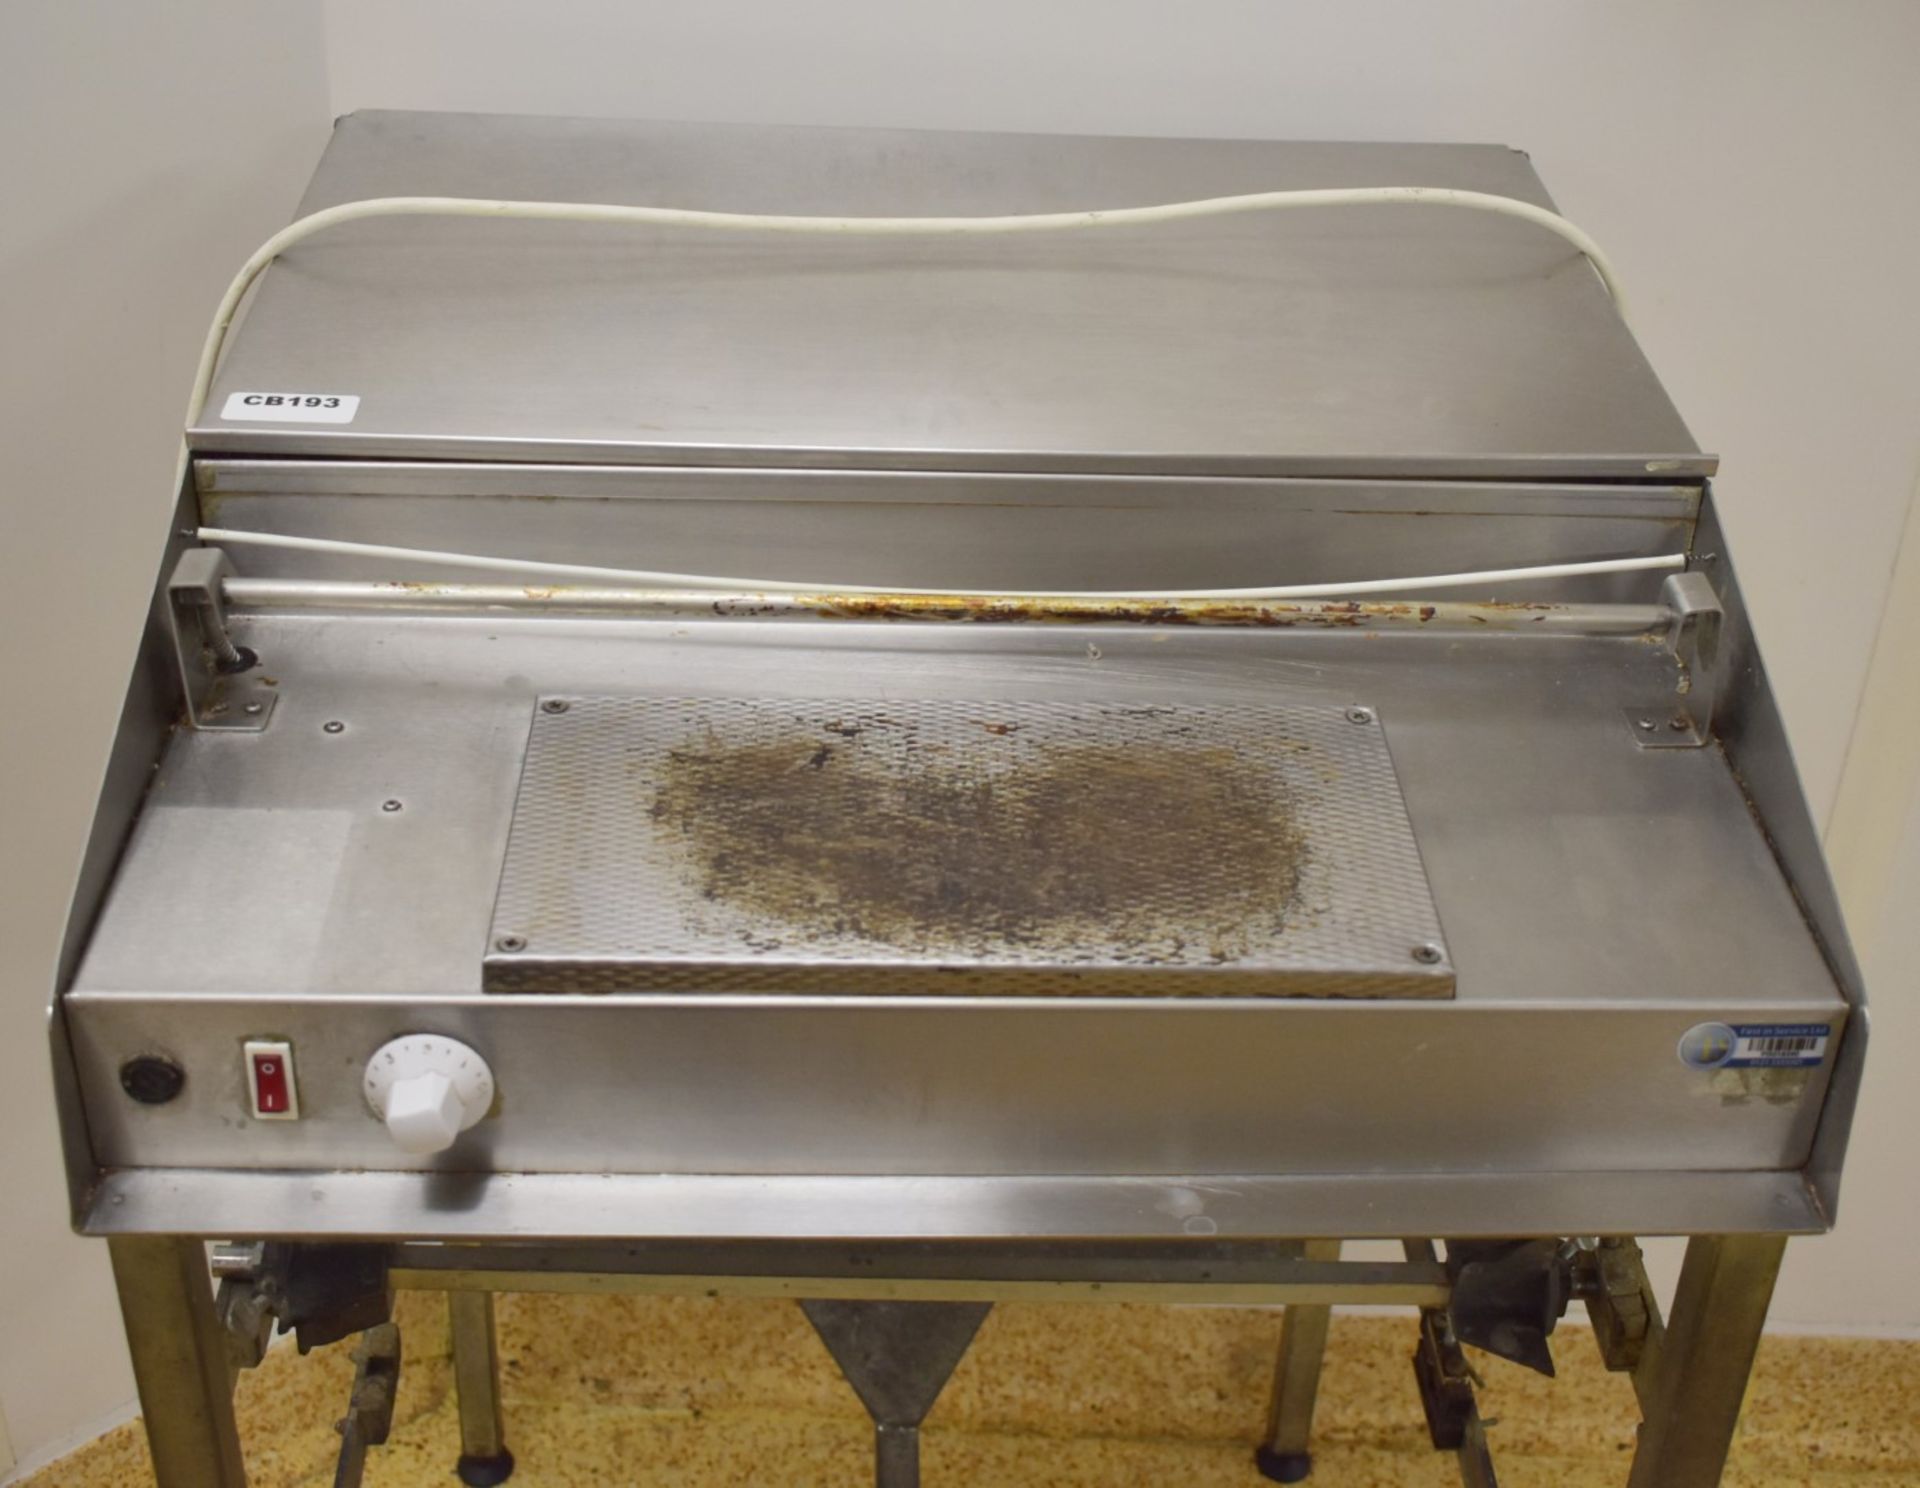 1 x Commercial Food Tray Sealer With Stand - Features Stainless Steel Finish and 240v Plug - H96 x - Image 3 of 3